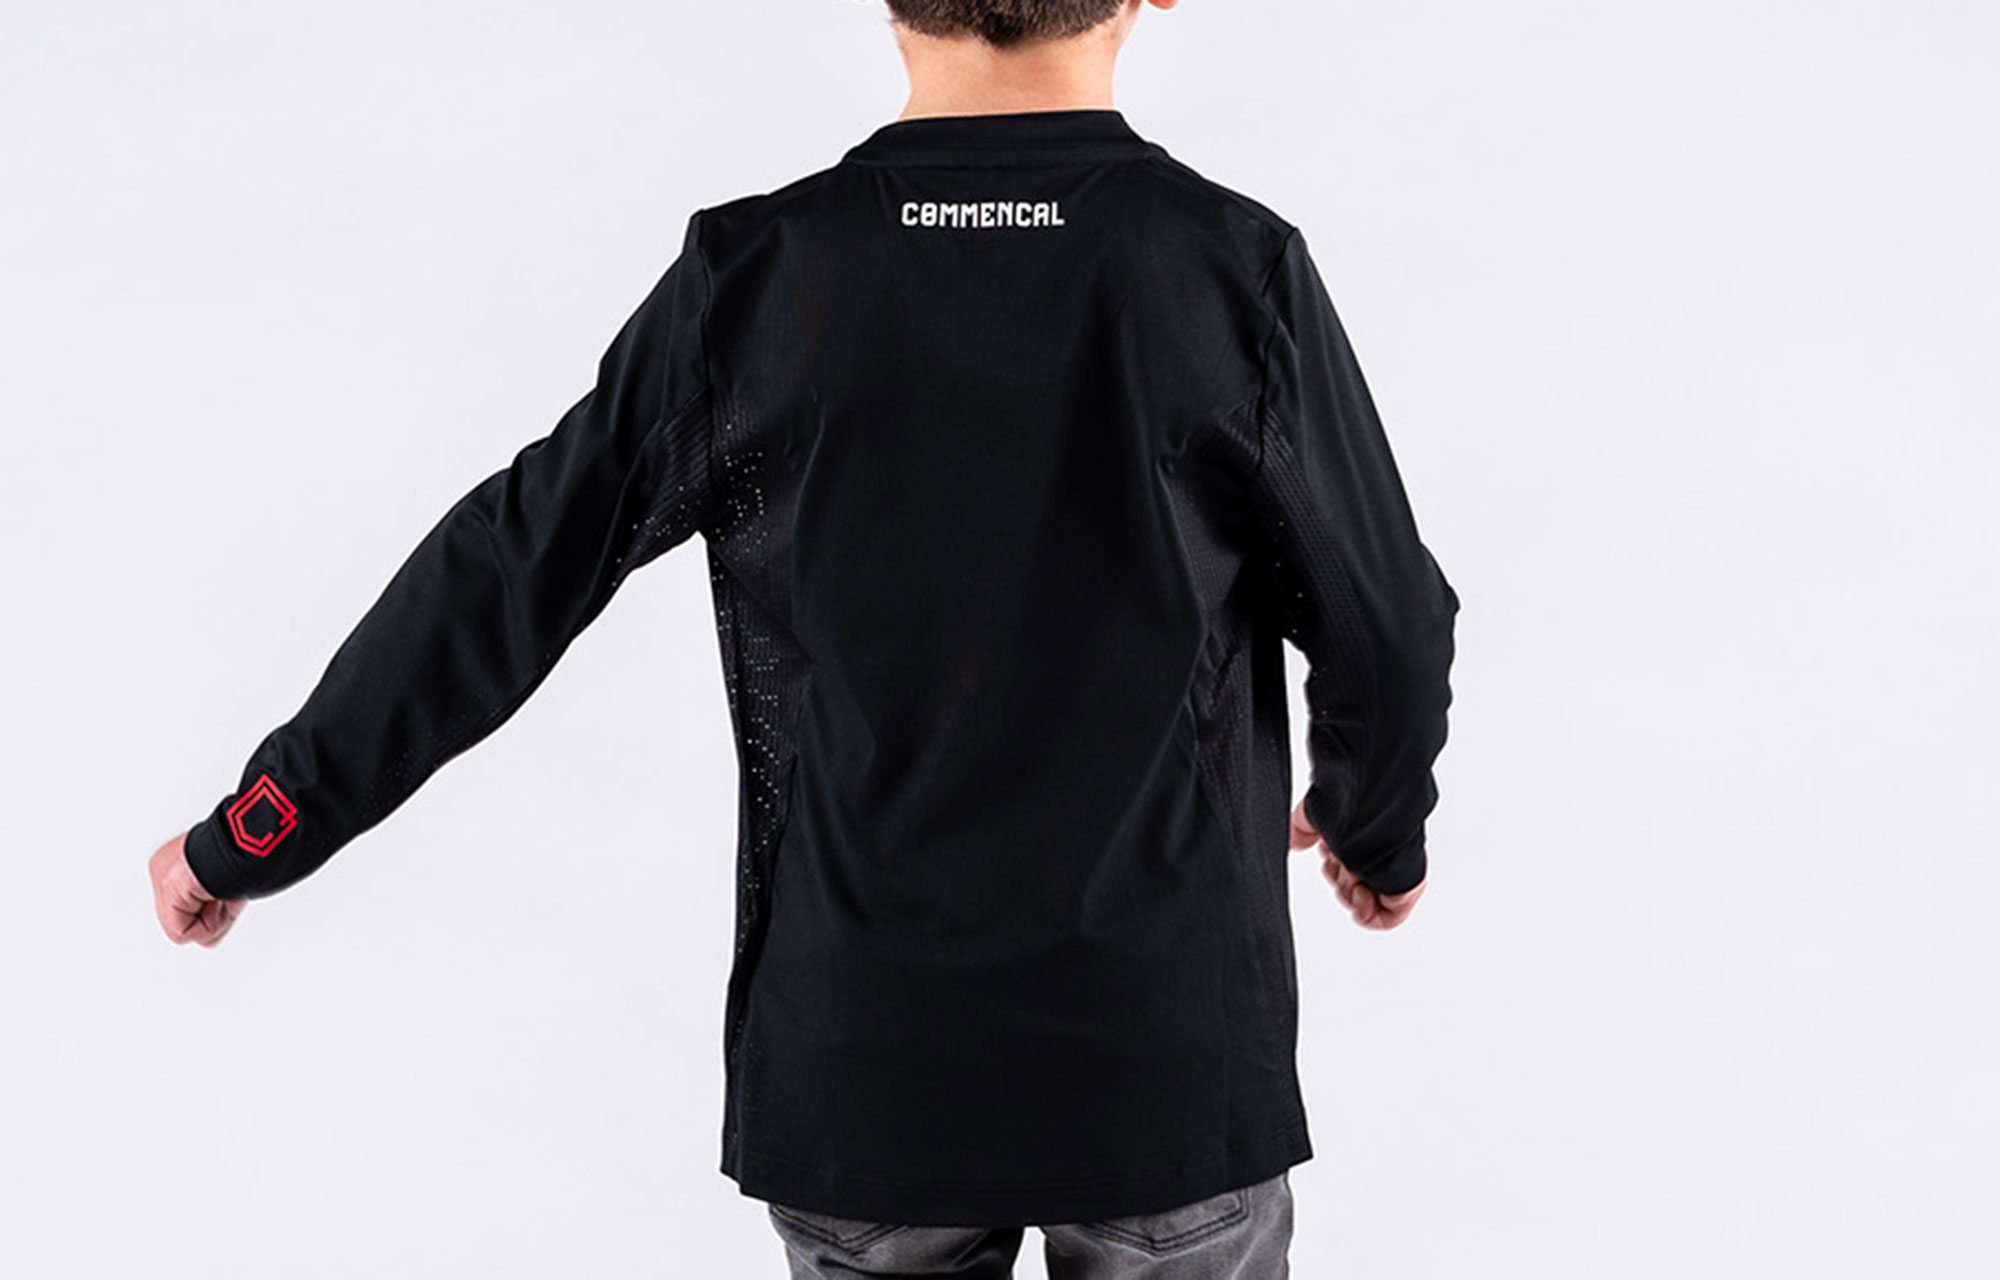 COMMENCAL KIDS LONG SLEEVE CORPORATE JERSEY BLACK image number 0